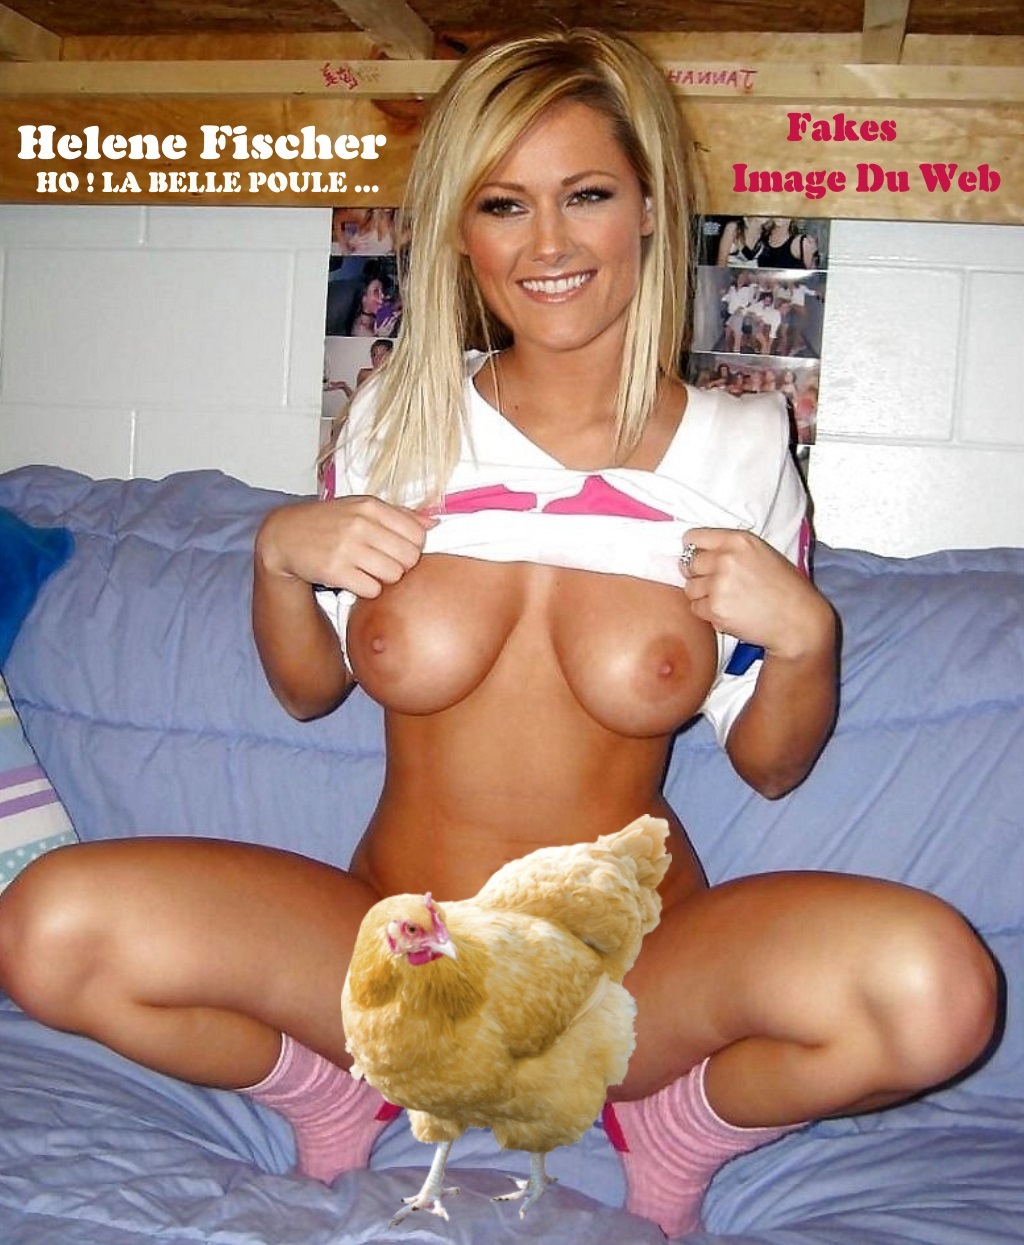 AT19.-Coquin-Helene-Fischer-Fakes-